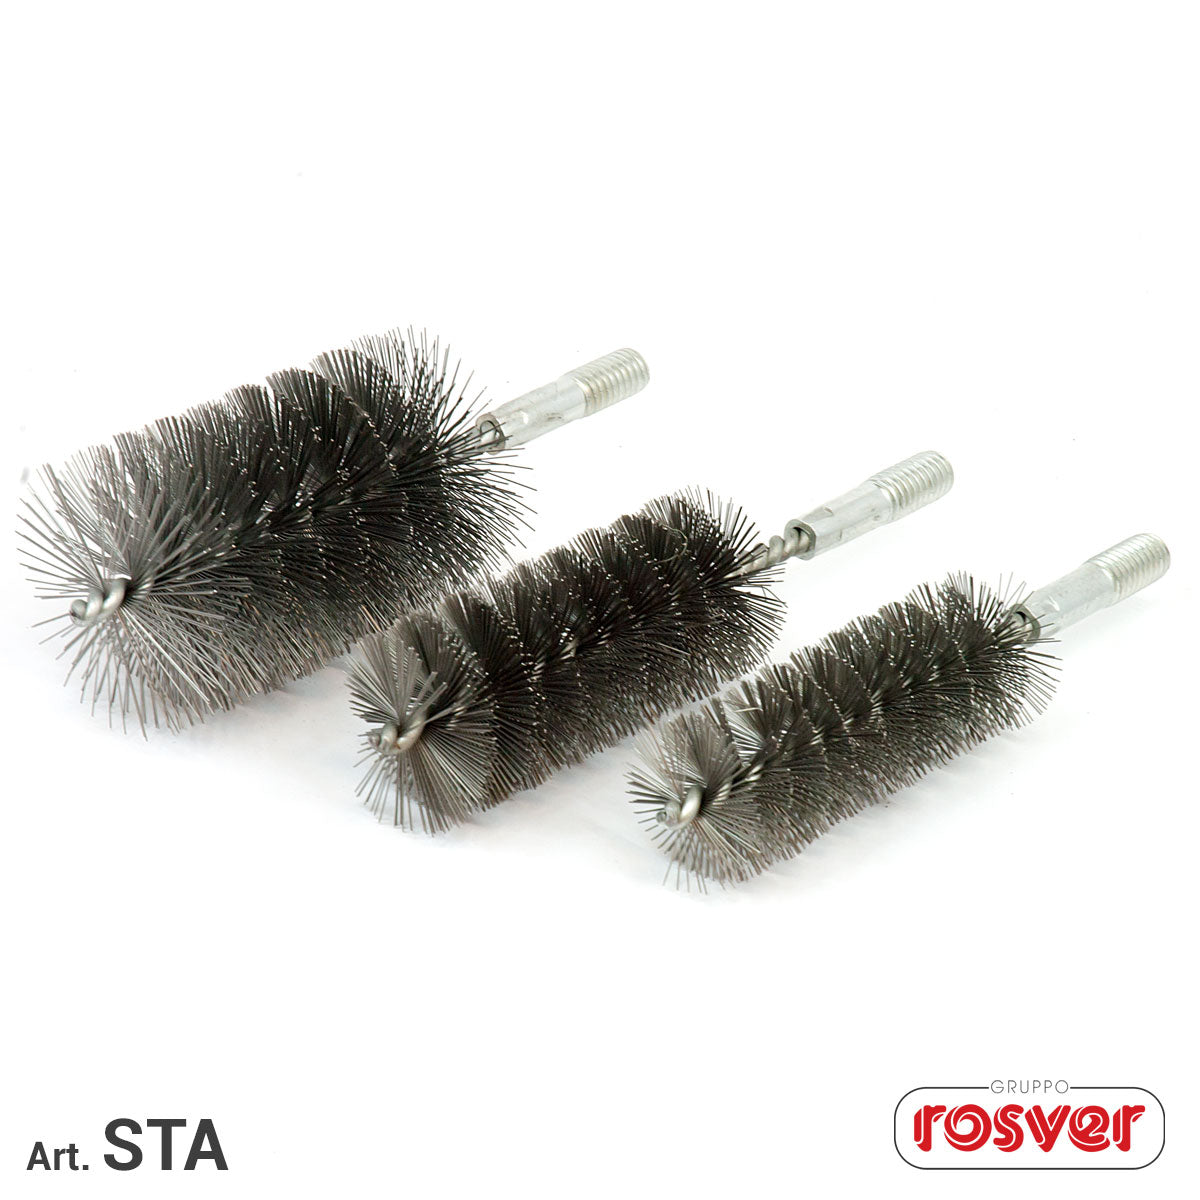 Steel Brushes with Thread Rosver - STA D.10xM6 - Conf.10pz